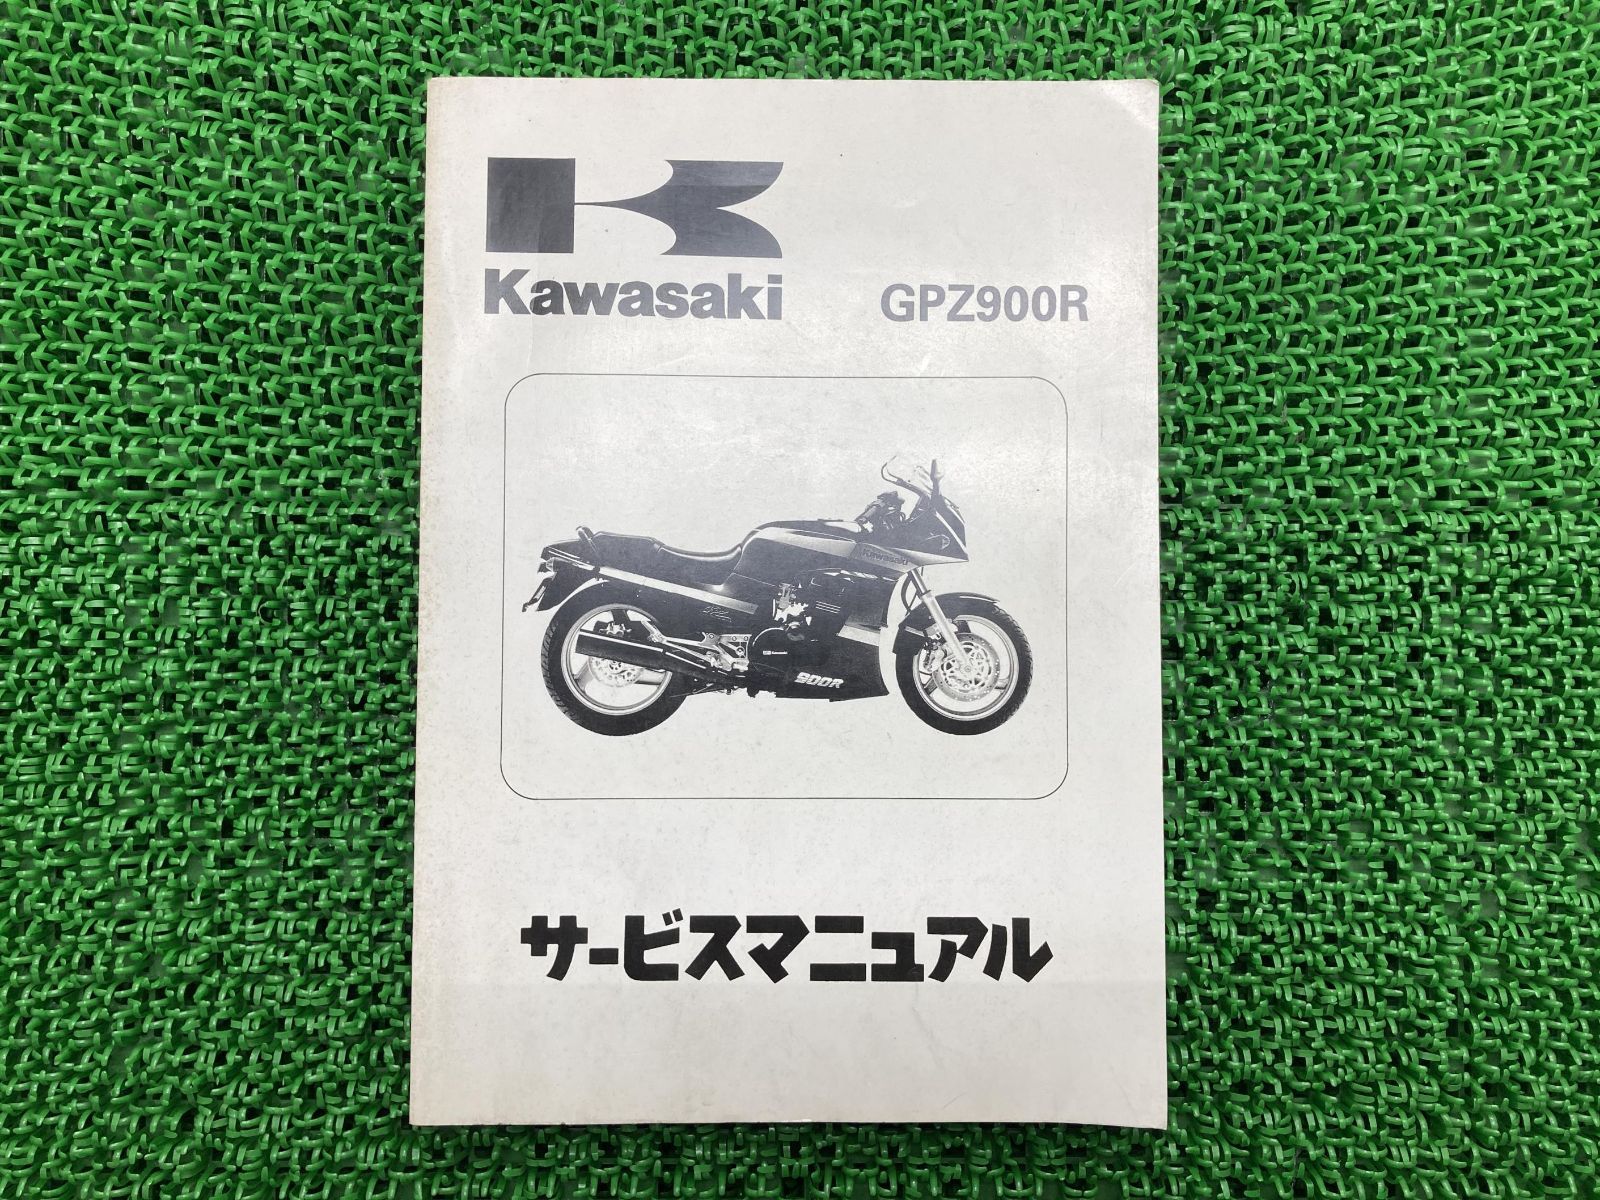 GPZ900R サービスマニュアル 4版 カワサキ 正規 中古 バイク 整備書 ZR900-A8 A9 ZR900-A10 A12 配線図有り 車検  整備情報